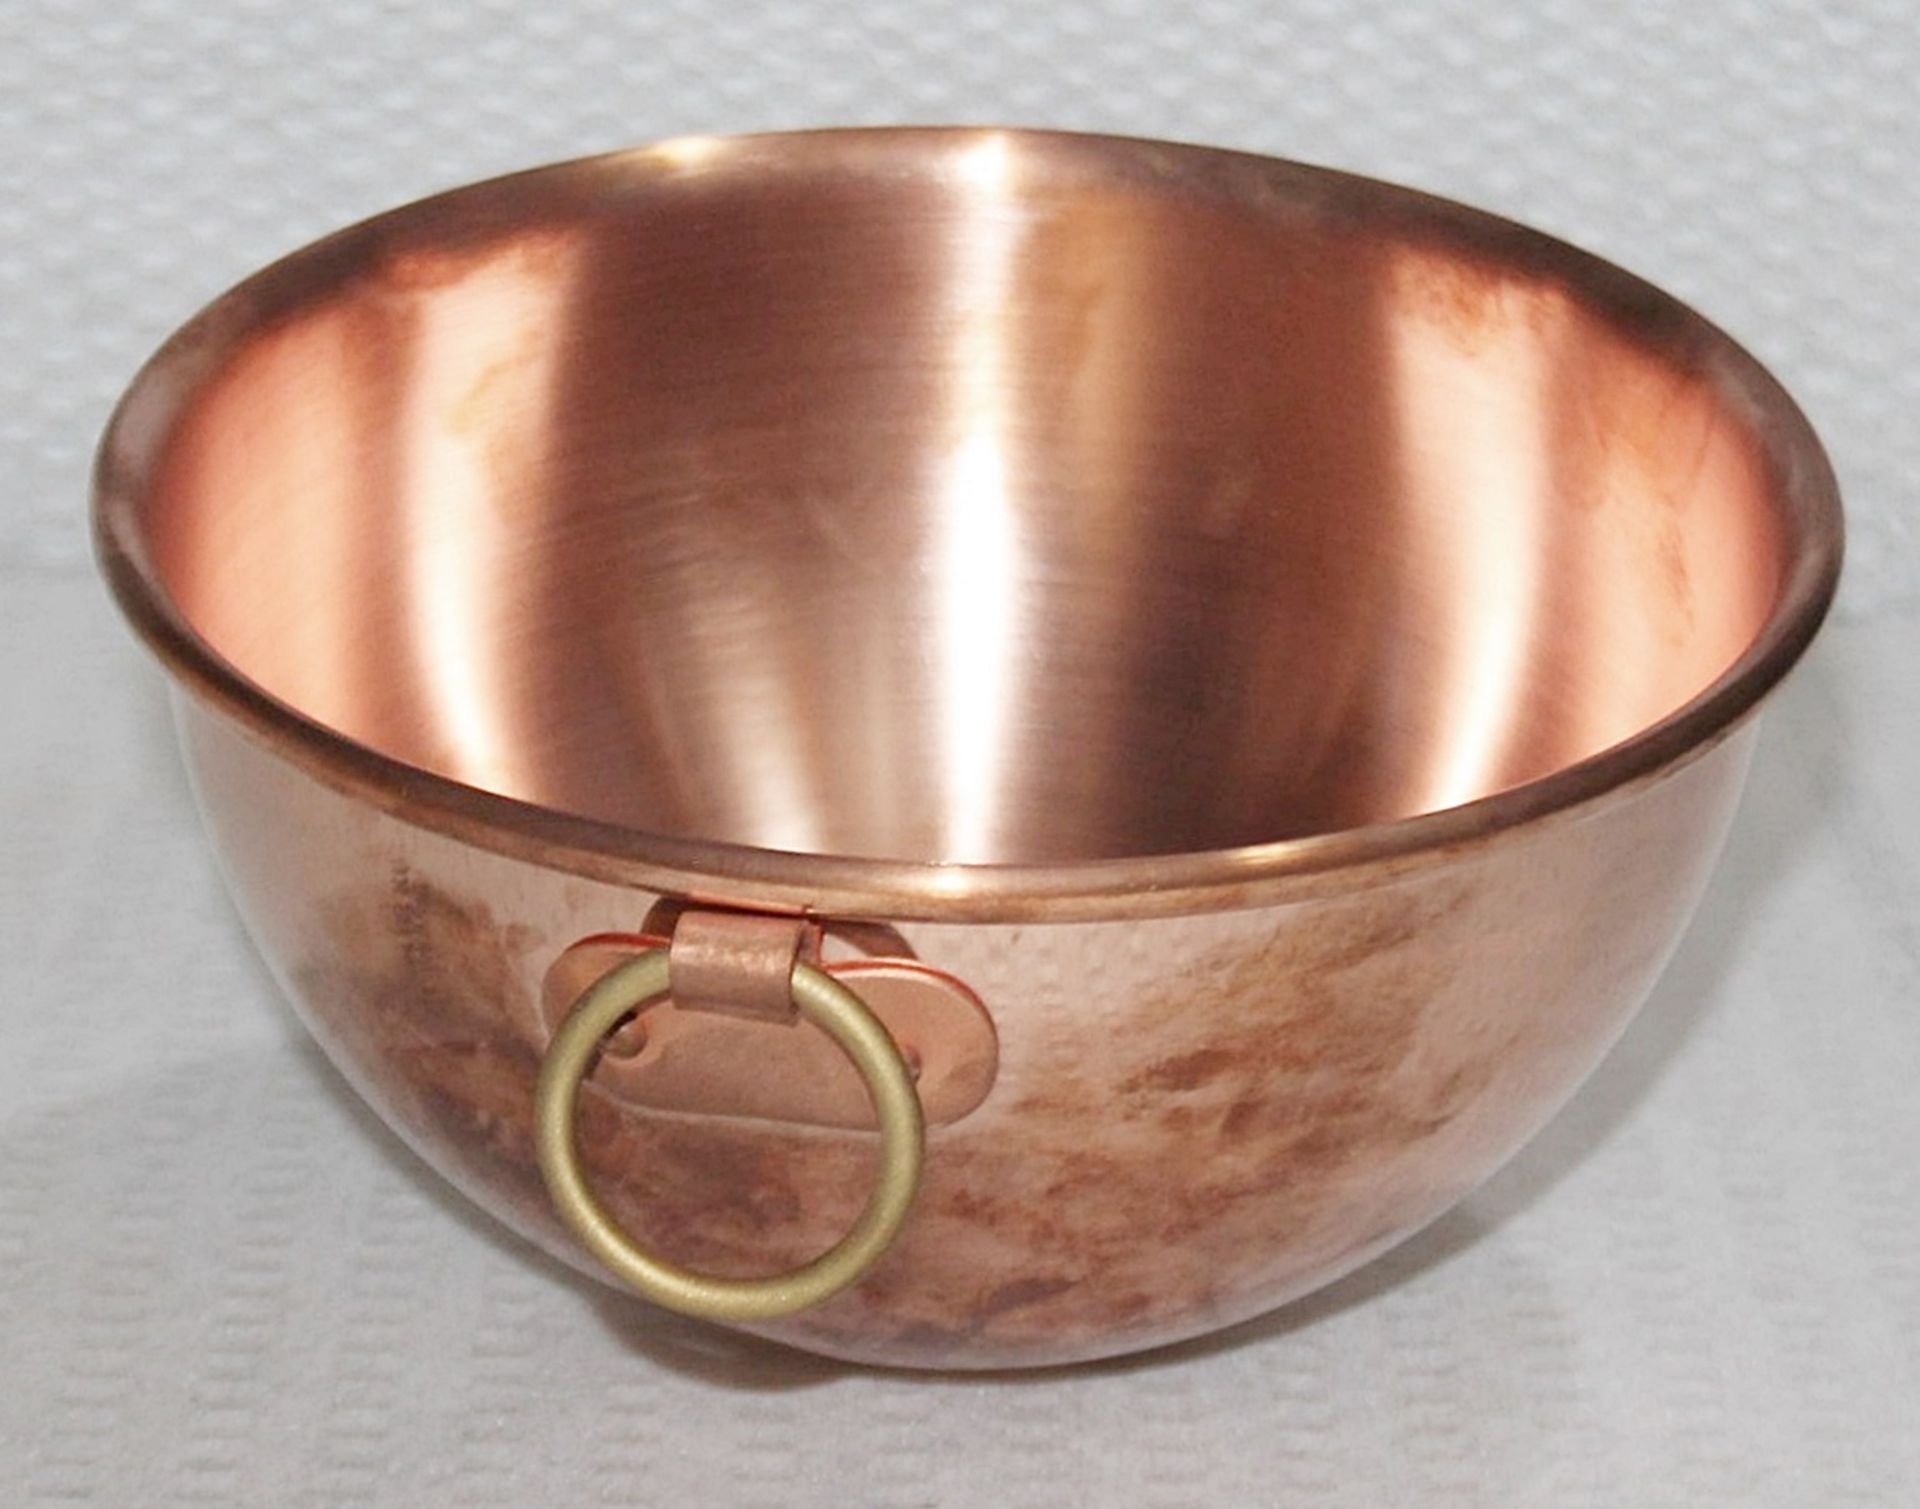 1 x MAUVIEL Copper Mixing Bowl (20cm) - Unused Wrapped Stock - Ref: HAR262/FEB22/WH2/PAL9 - - Image 4 of 5